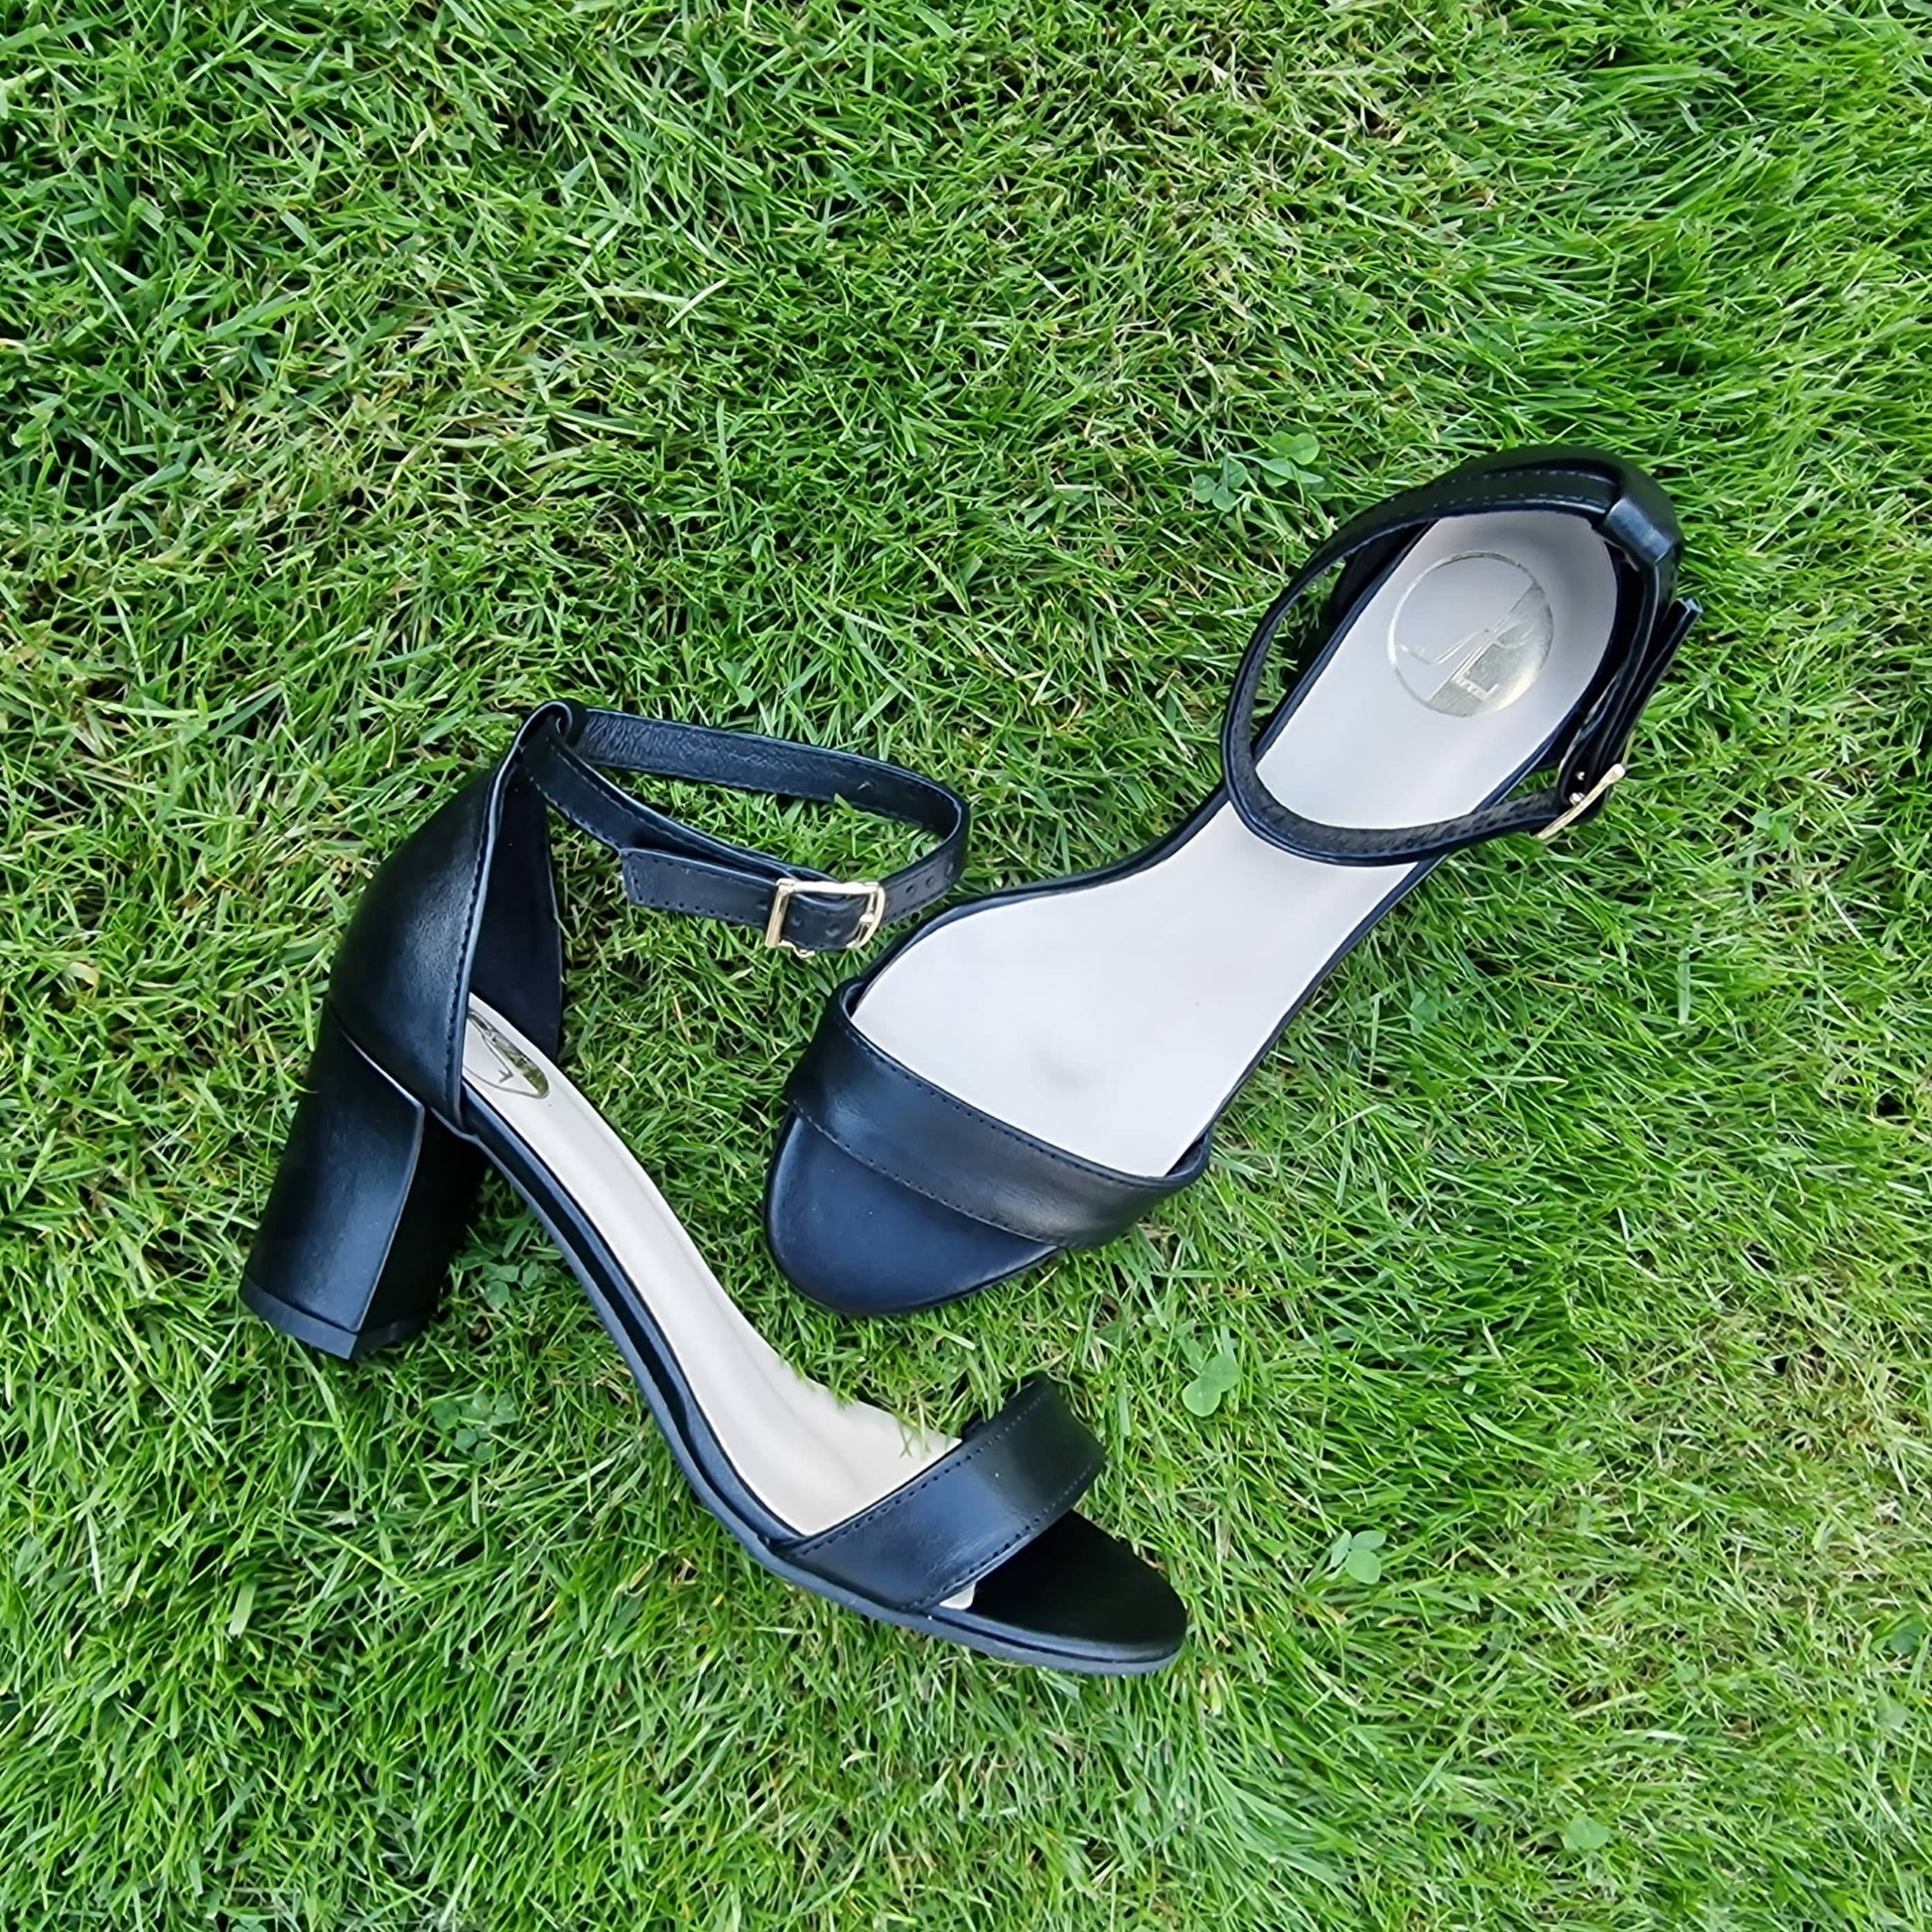 Ankle strap small size ladies heels in black leather